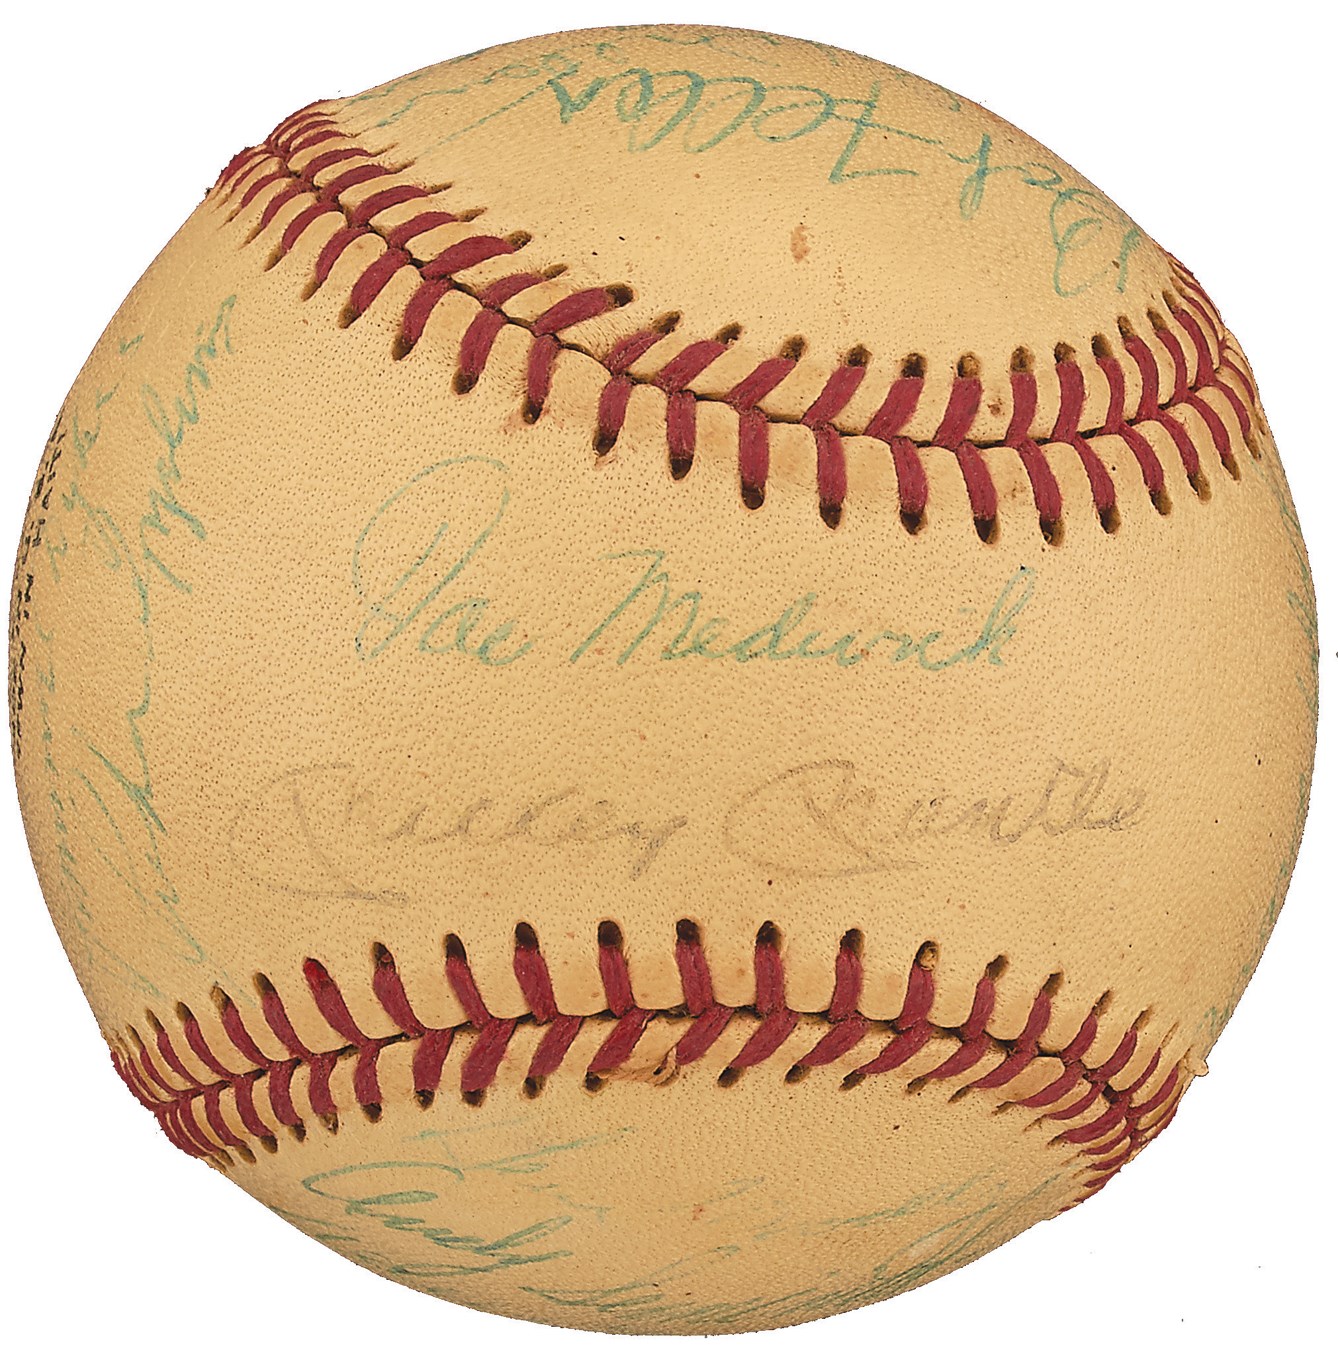 Baseball Autographs - Circa 1974 Hall of Famers Signed Baseball with Mantle and Medwick